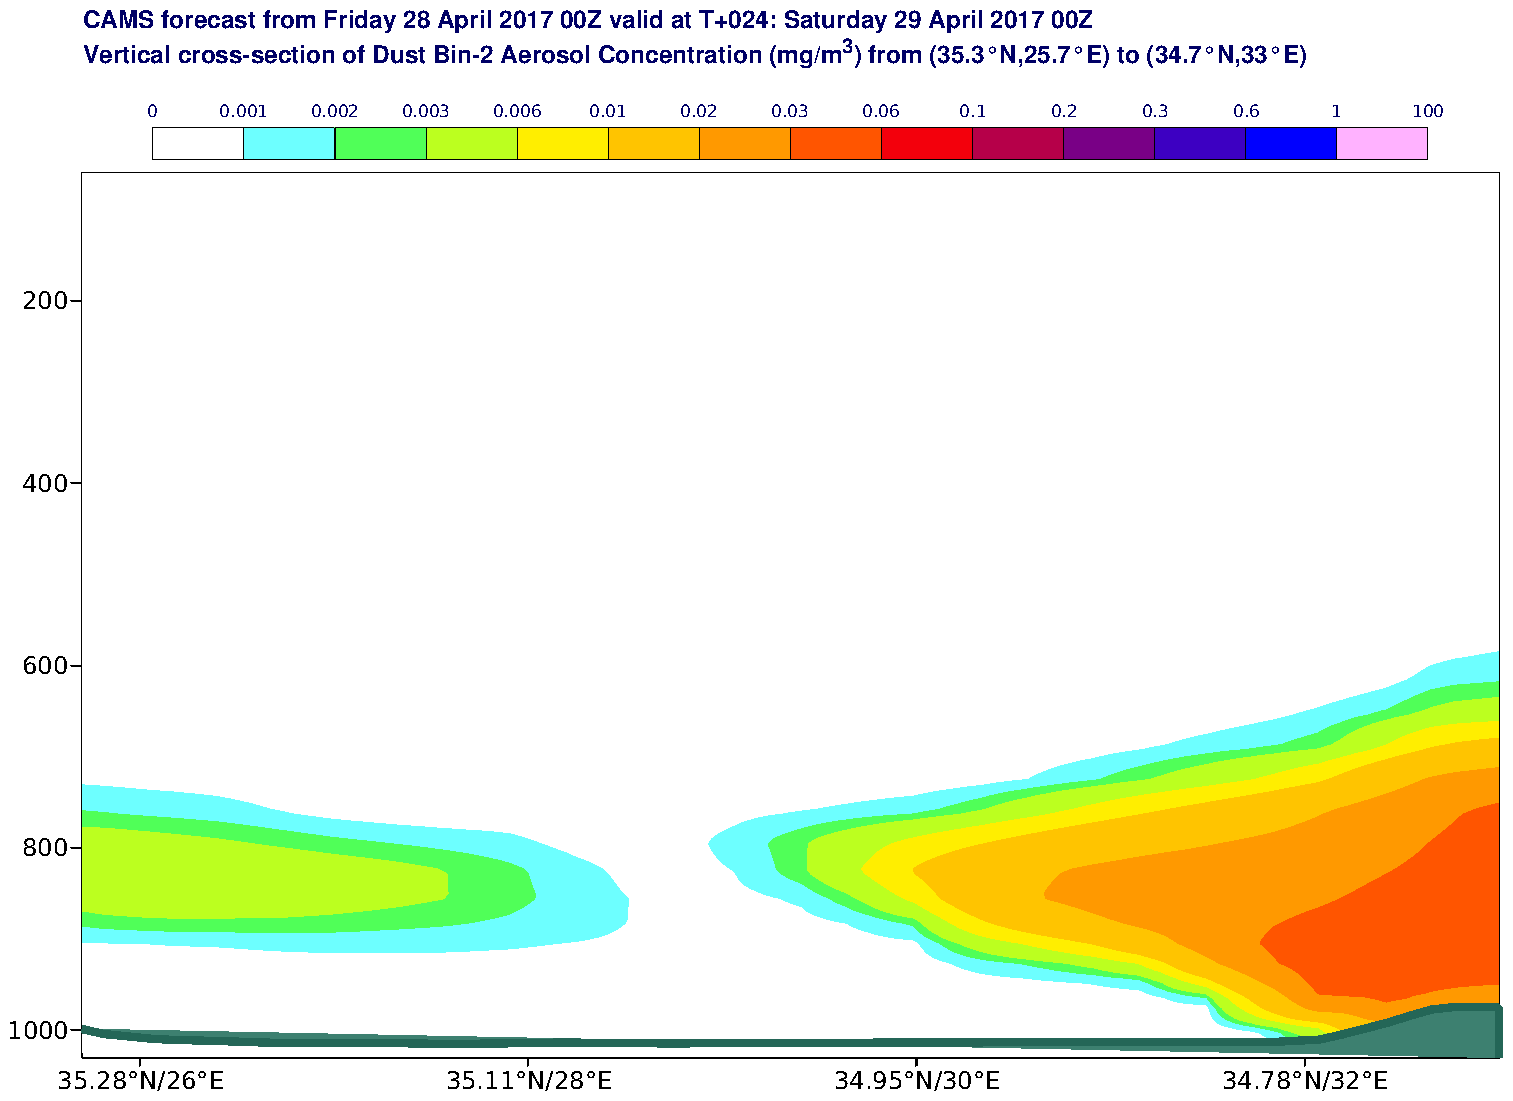 Vertical cross-section of Dust Bin-2 Aerosol Concentration (mg/m3) valid at T24 - 2017-04-29 00:00